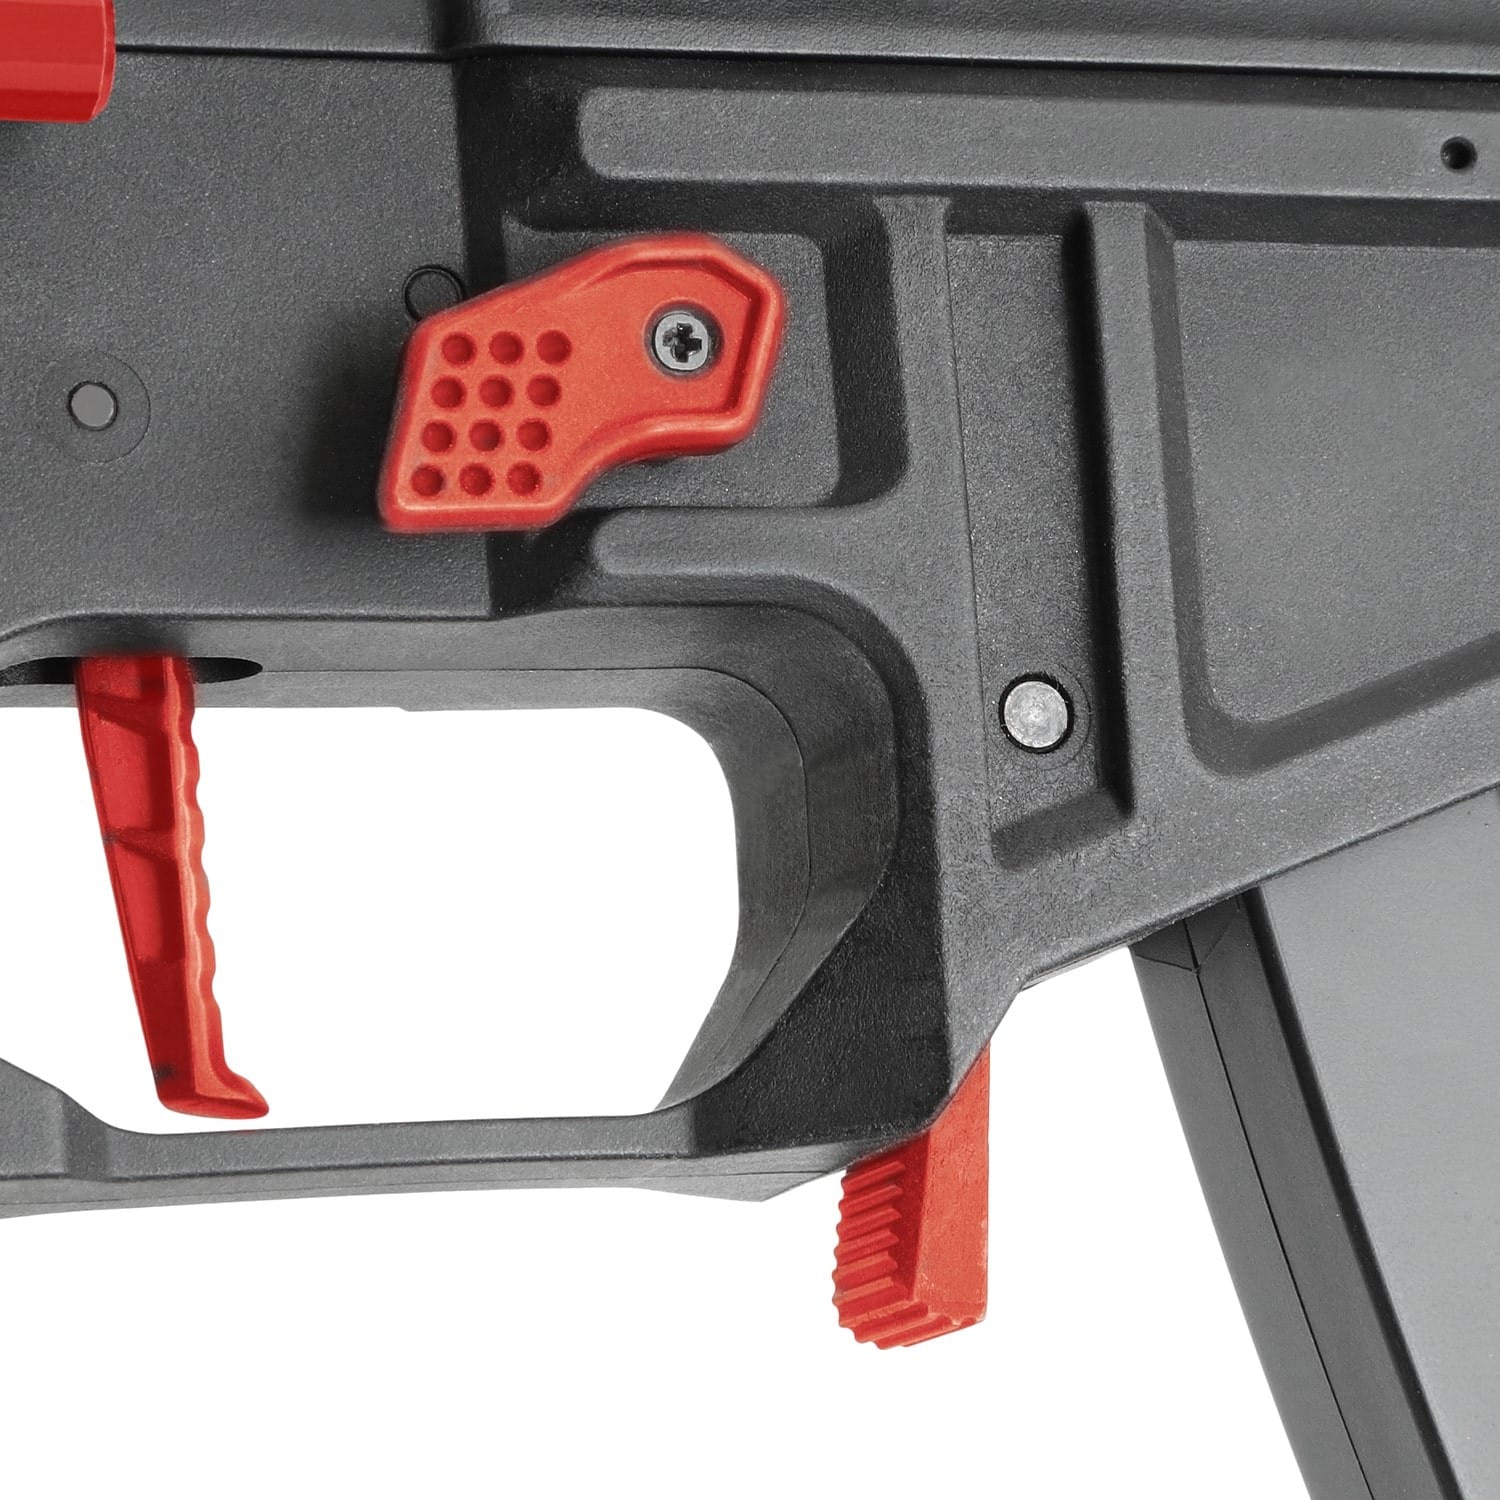 King Arms PDW 9mm SBR Shorty - Black & Red